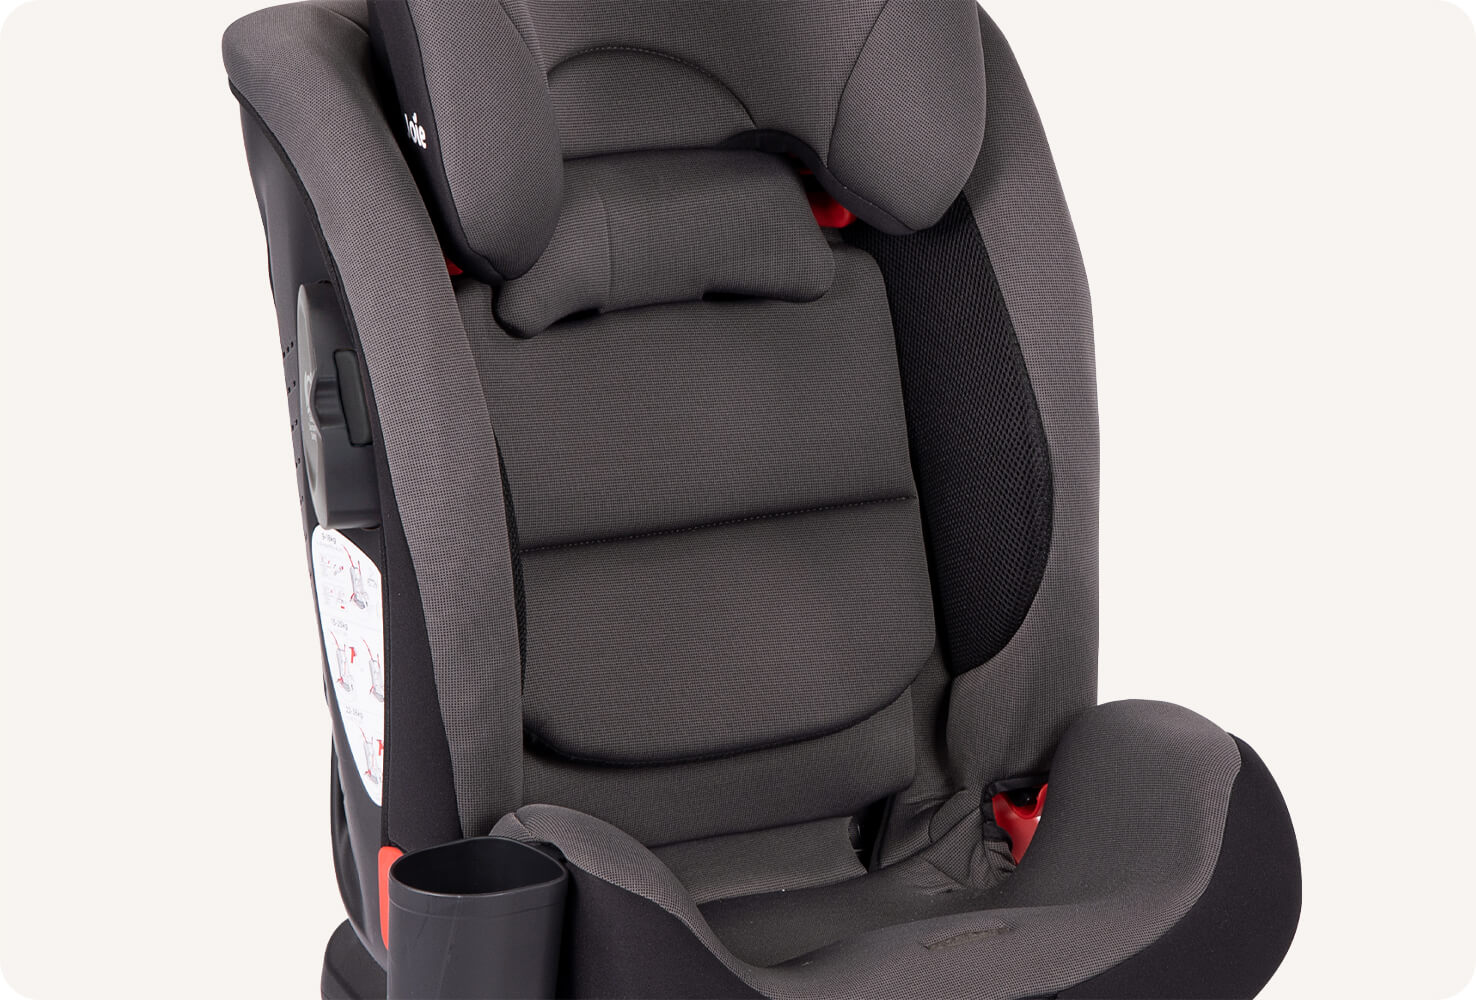 Close-up of the lower half of a dark gray Joie bold R toddler car seat to show the attached cup holder.